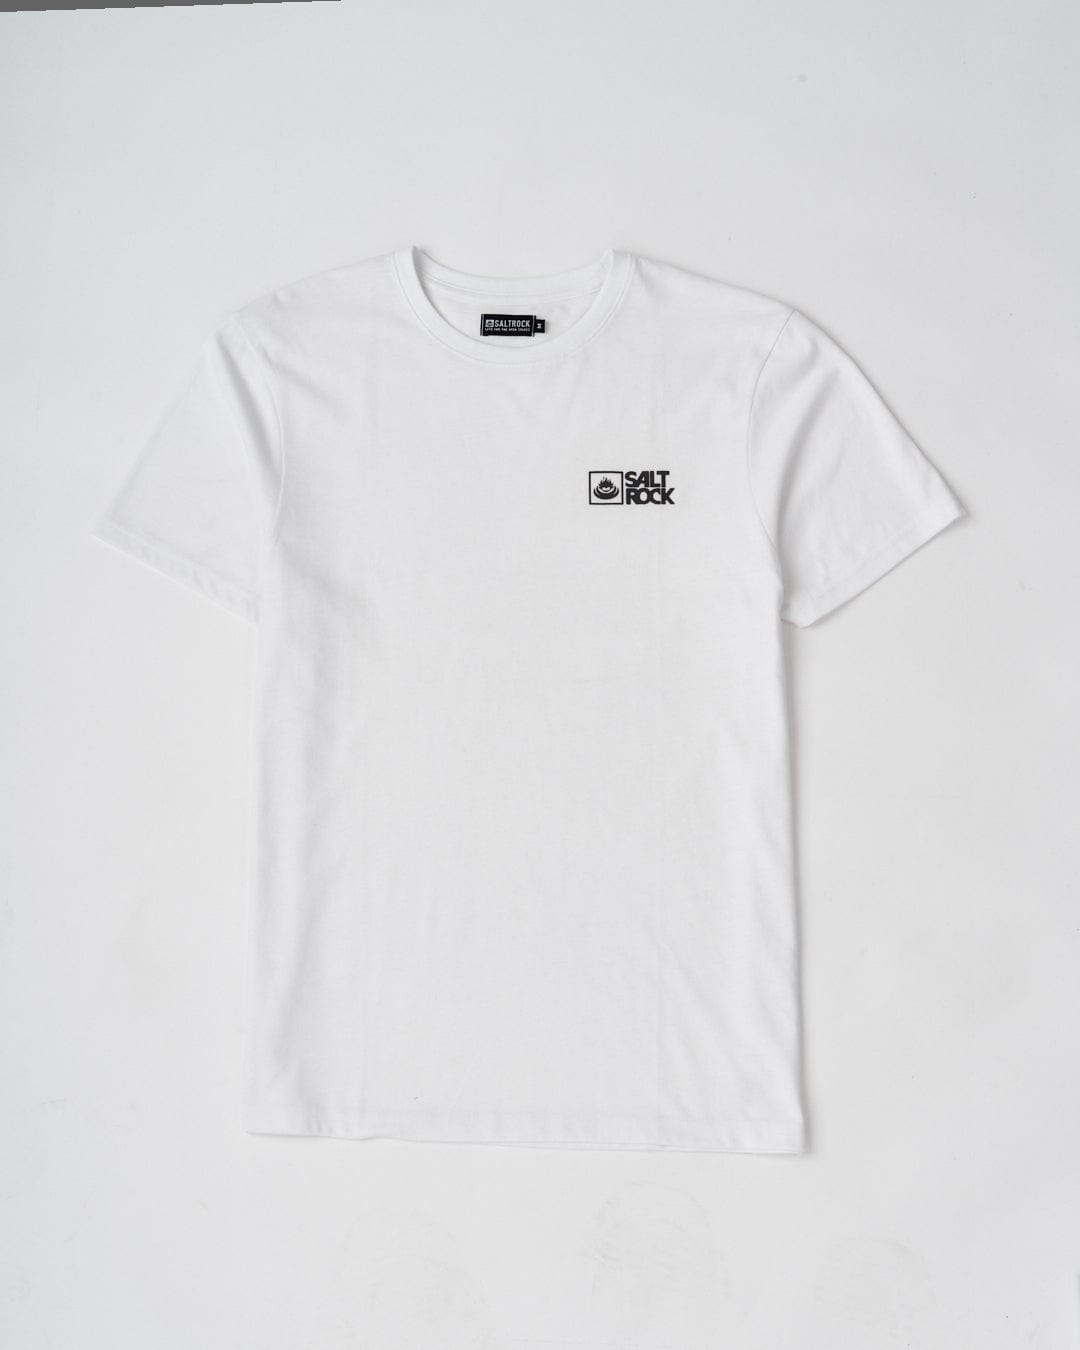 A Saltrock Original - Mens Short Sleeve T-Shirt in White, crafted from lightweight material with a small black Saltrock logo on the left chest area, displayed against a white background.